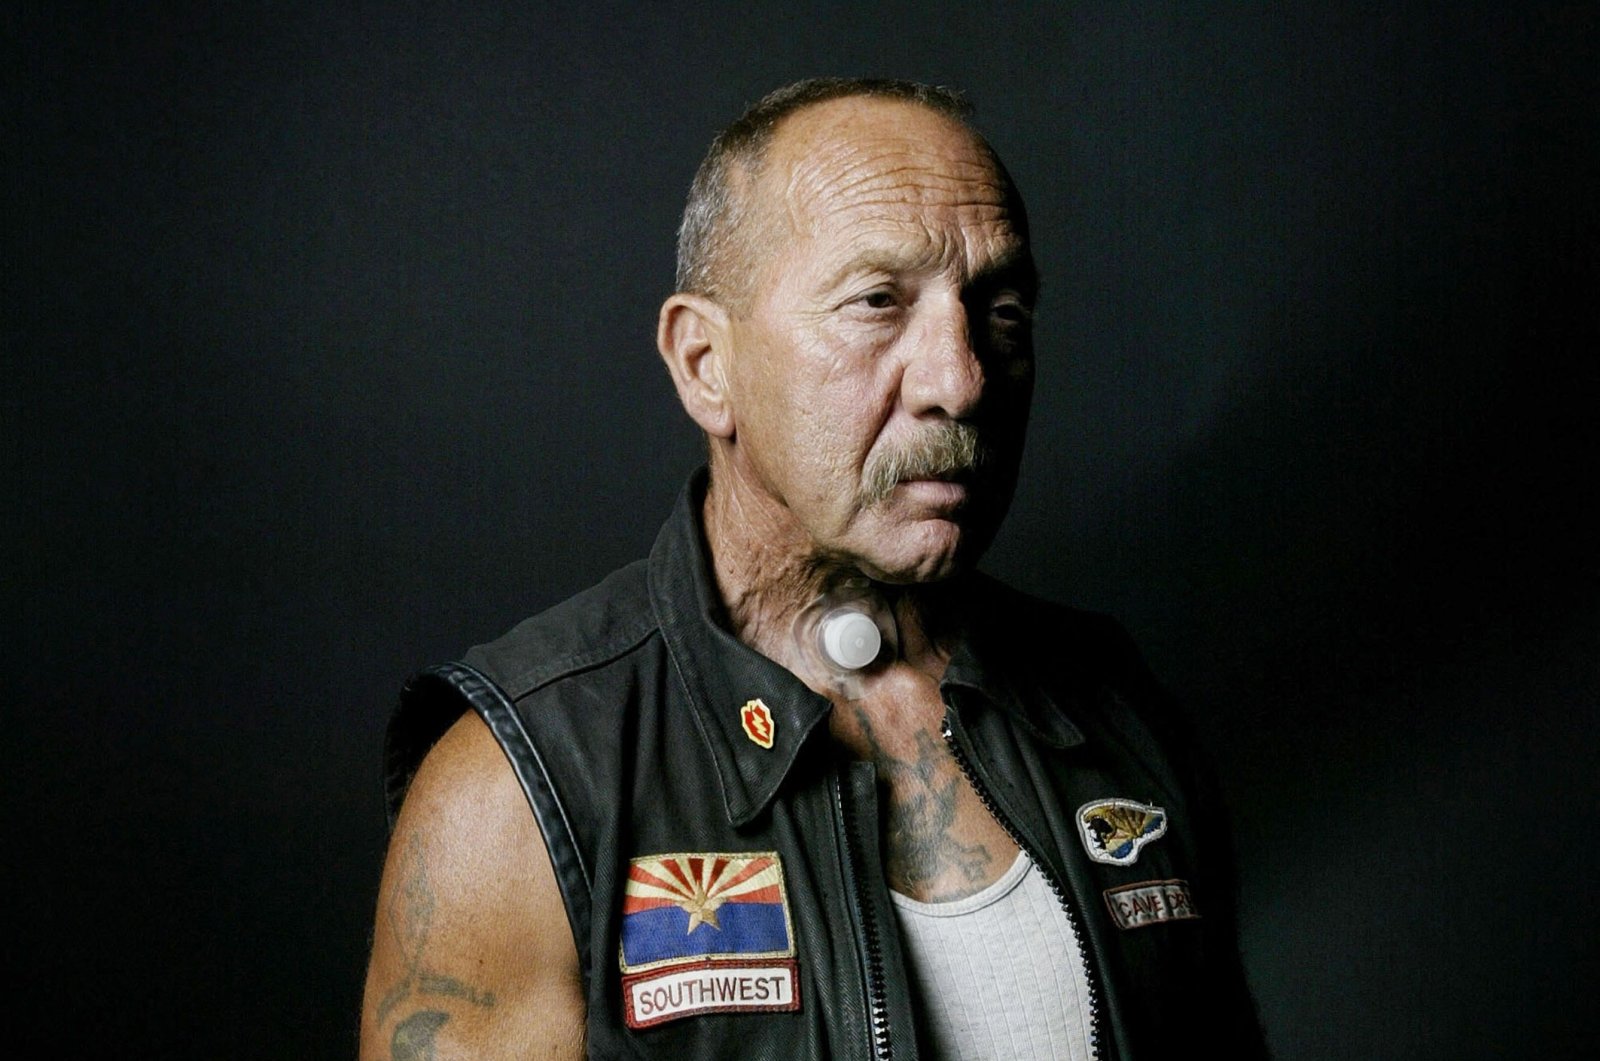 In this file photo taken on Aug. 22, 2003, Sonny Barger, founder of the Oakland, California charter of the Hells Angels Motorcycle Club, attends a party in Quincy, Illinois, U.S. (AFP Photo)